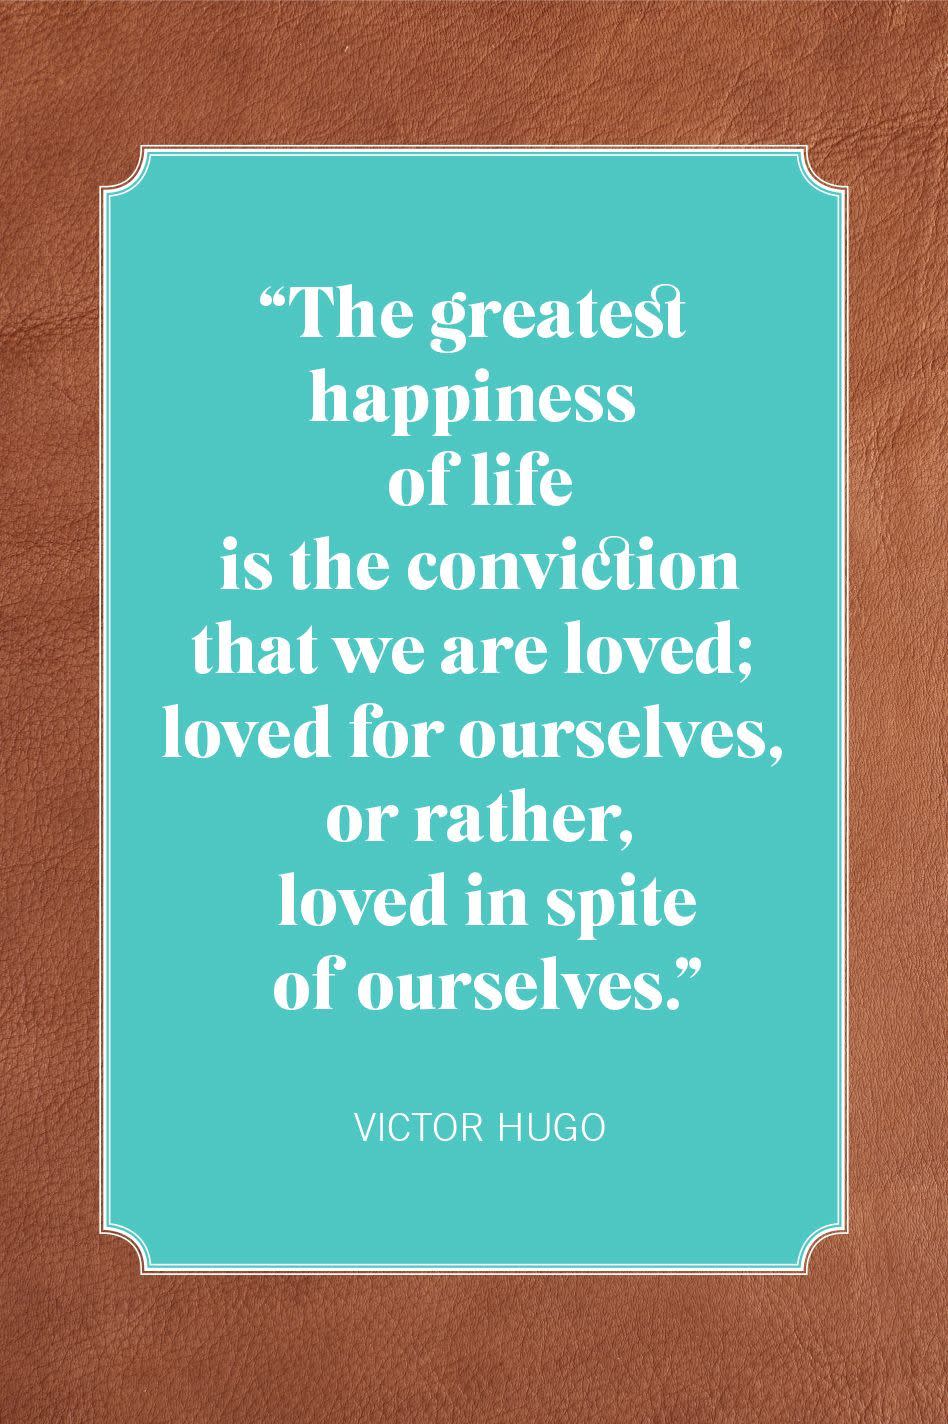 valentines day quotes for friends victor hugo